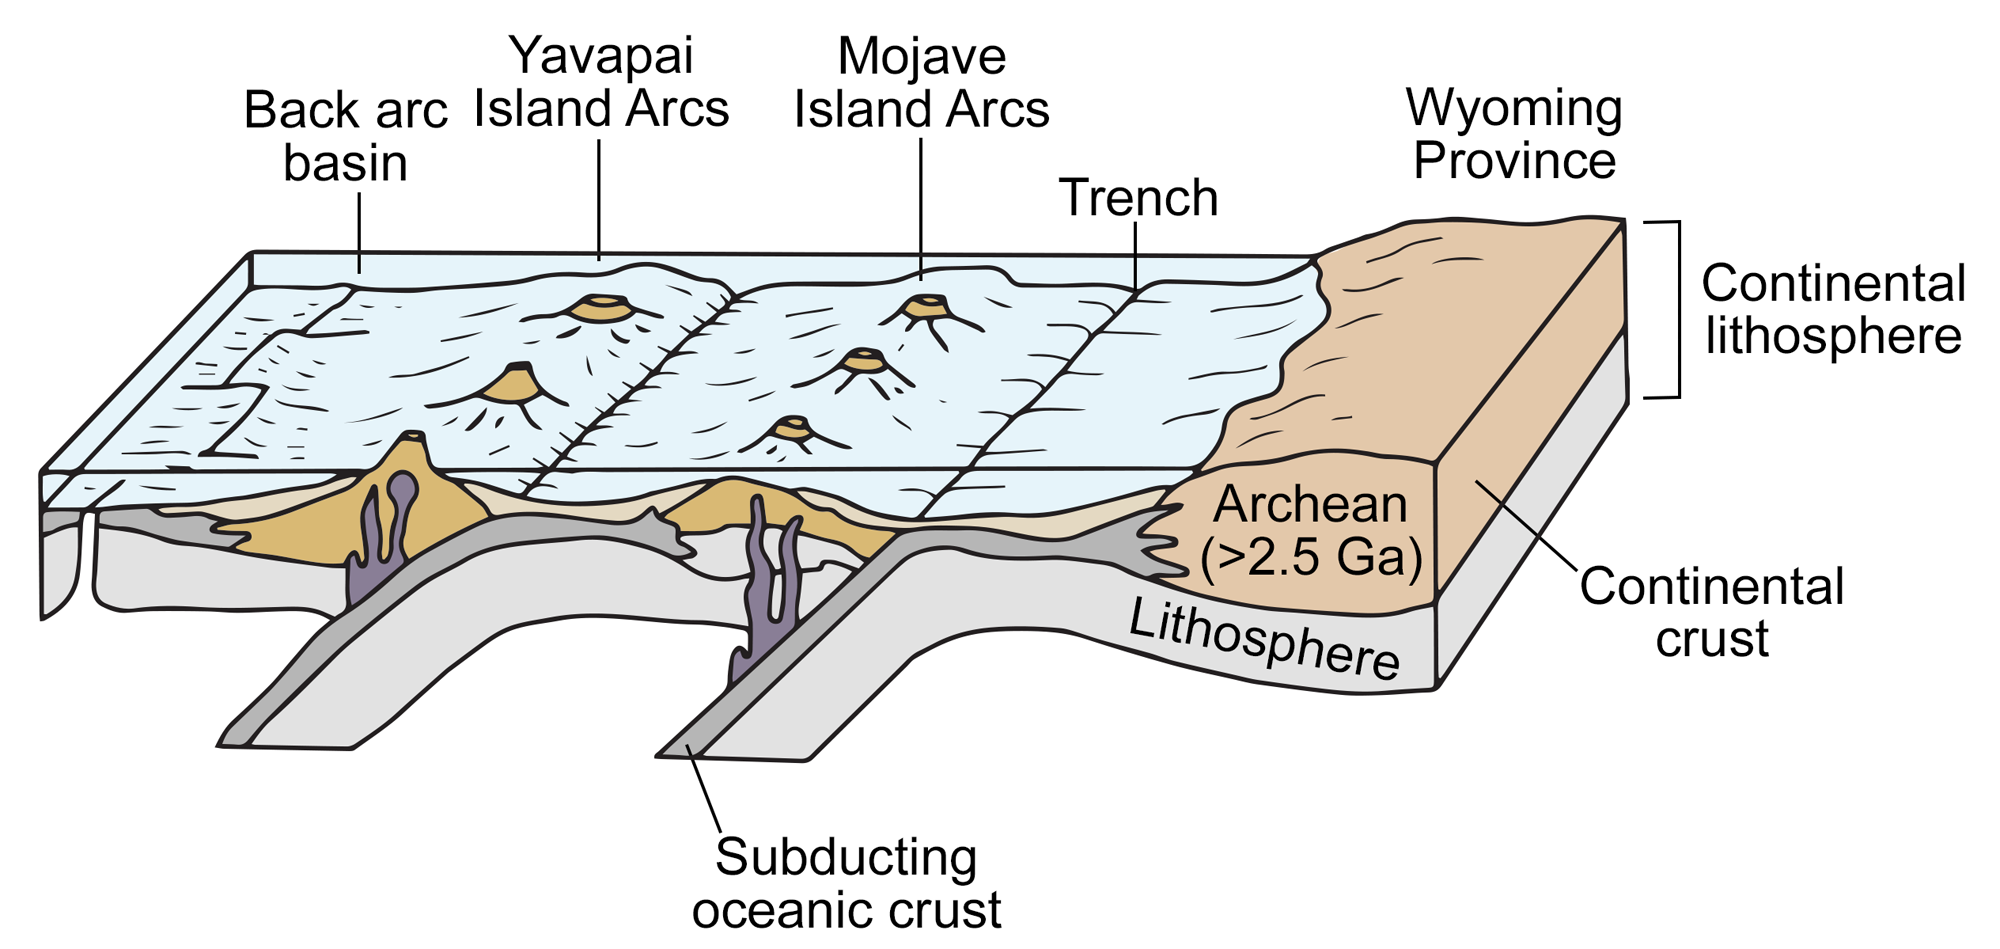 Diagram of the southwestern United States during the Precambrian showing the accretion of the Mojave and Yavapai provinces. In this diagram, the Island Arcs that make up the future provinces are still off the coast of ancient North America. Each island arc is on the edge of an oceanic plate that is overriding the oceanic plate that forms the edge of the plate on which the ancient Wyoming Province (edge of the continent) is riding.